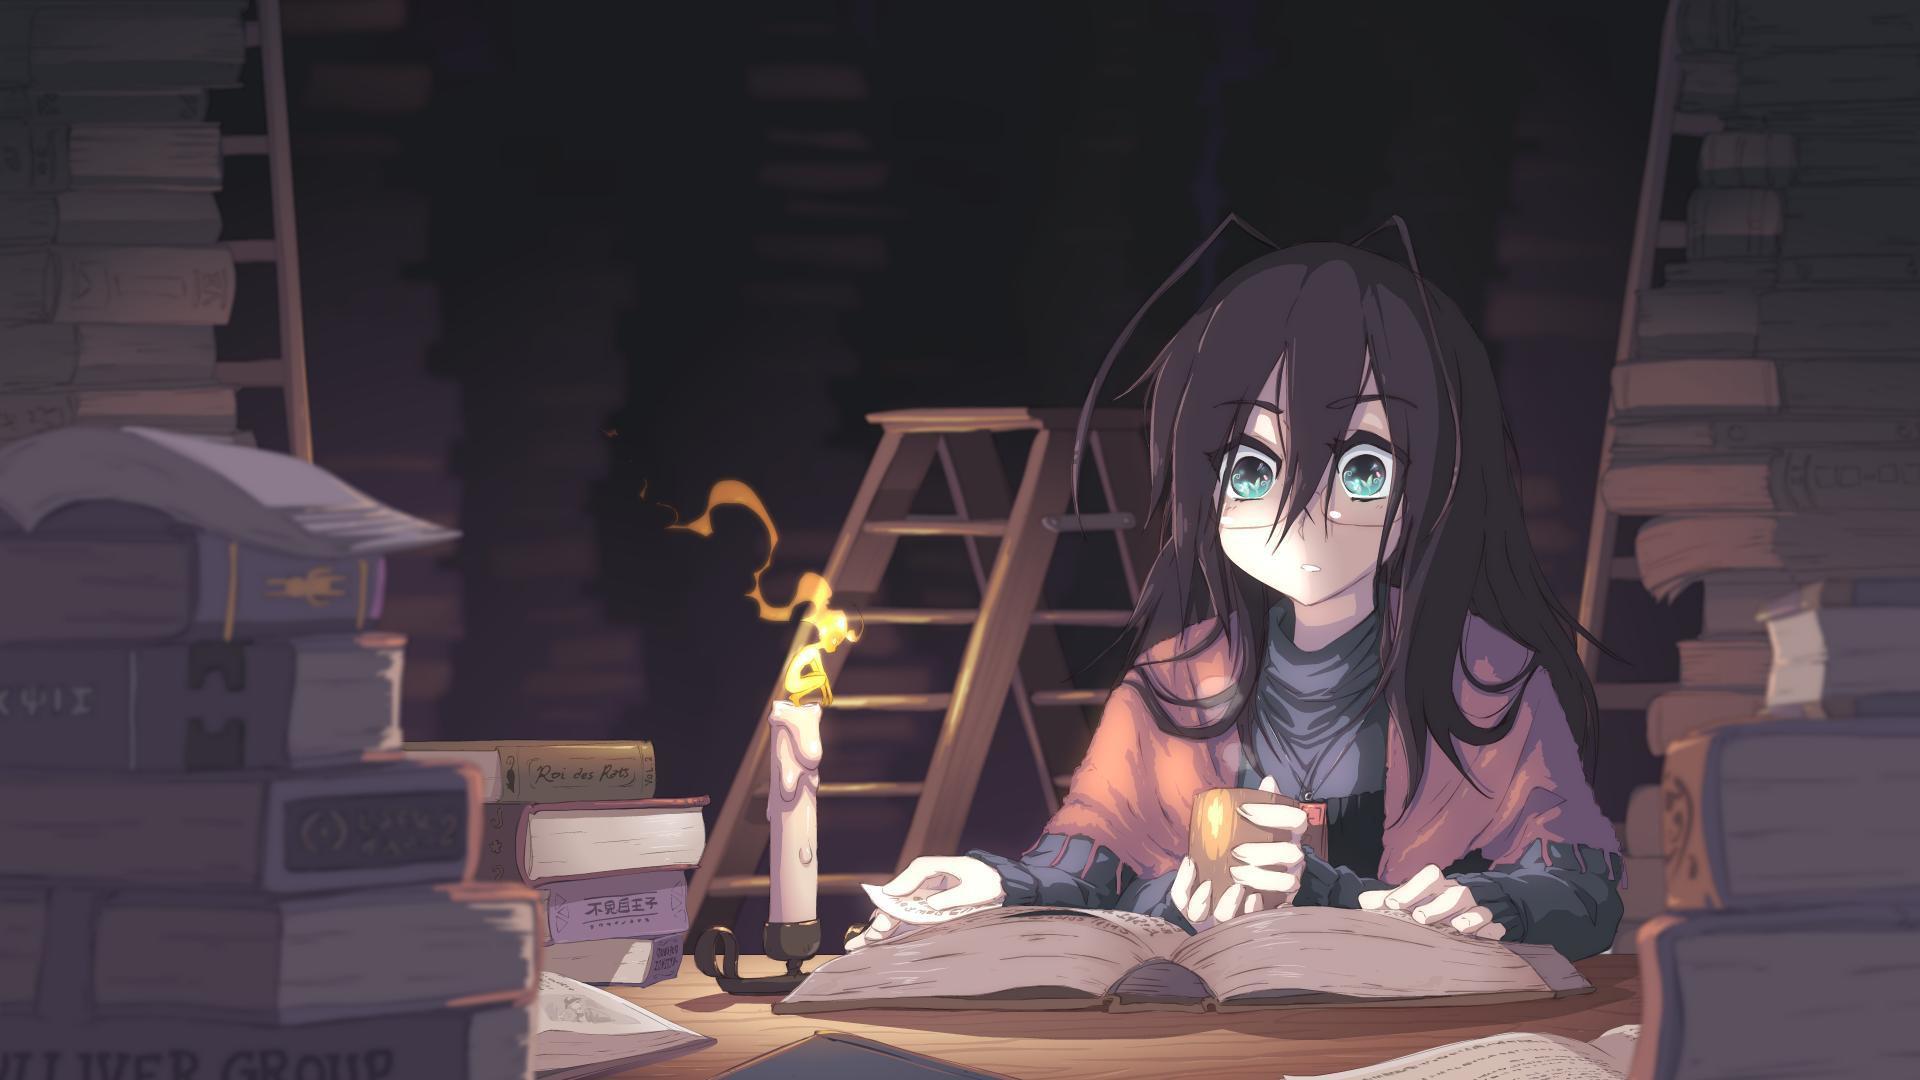 Girl studying at night free desktop backgrounds and wallpapers